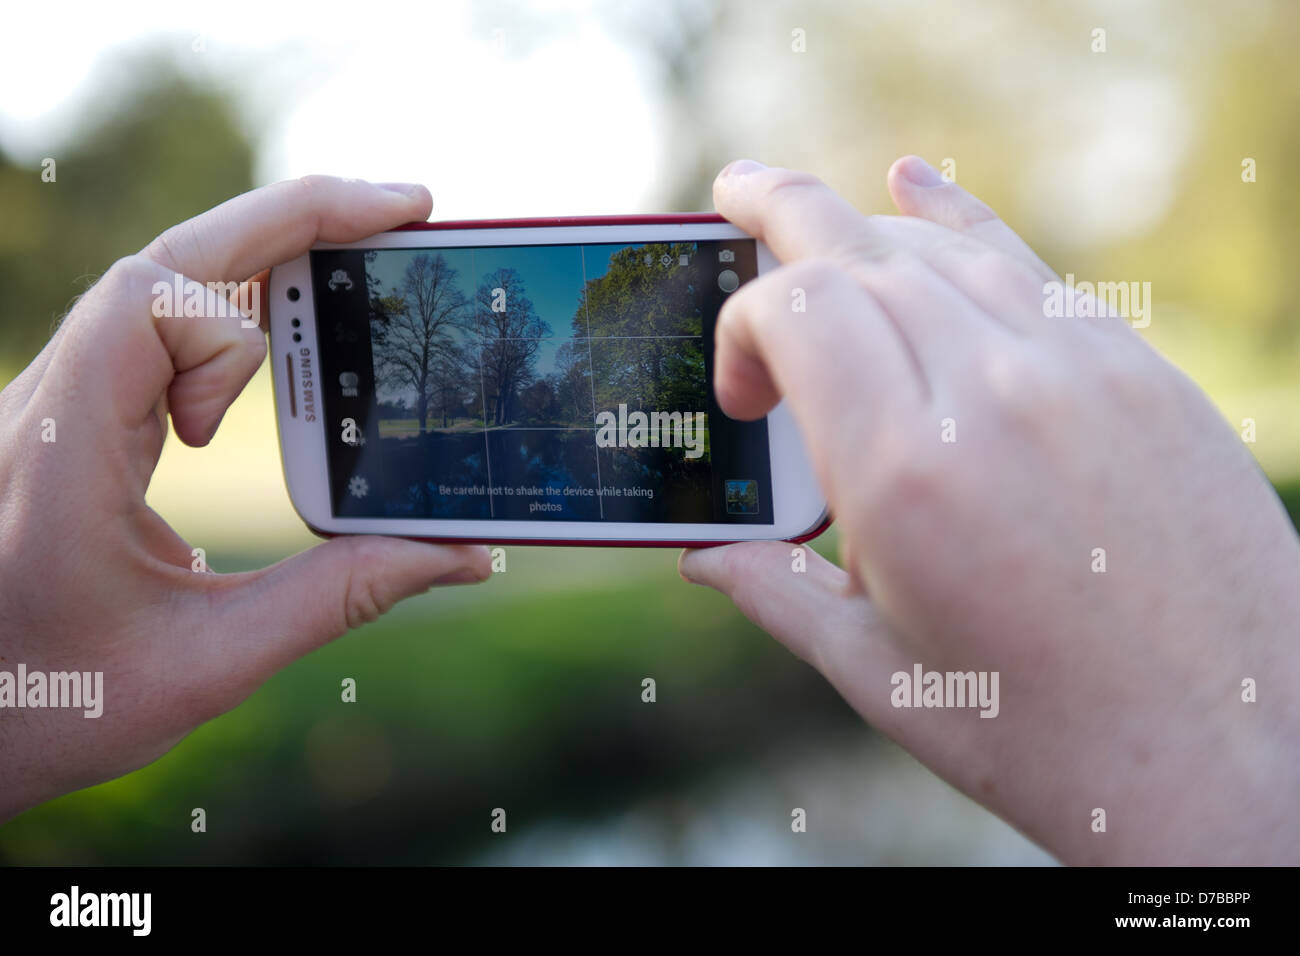 Hands are seen holding a Samsung Galaxy S3 phone, taking a photo of a park scene on the camera app of a river in a park. Stock Photo